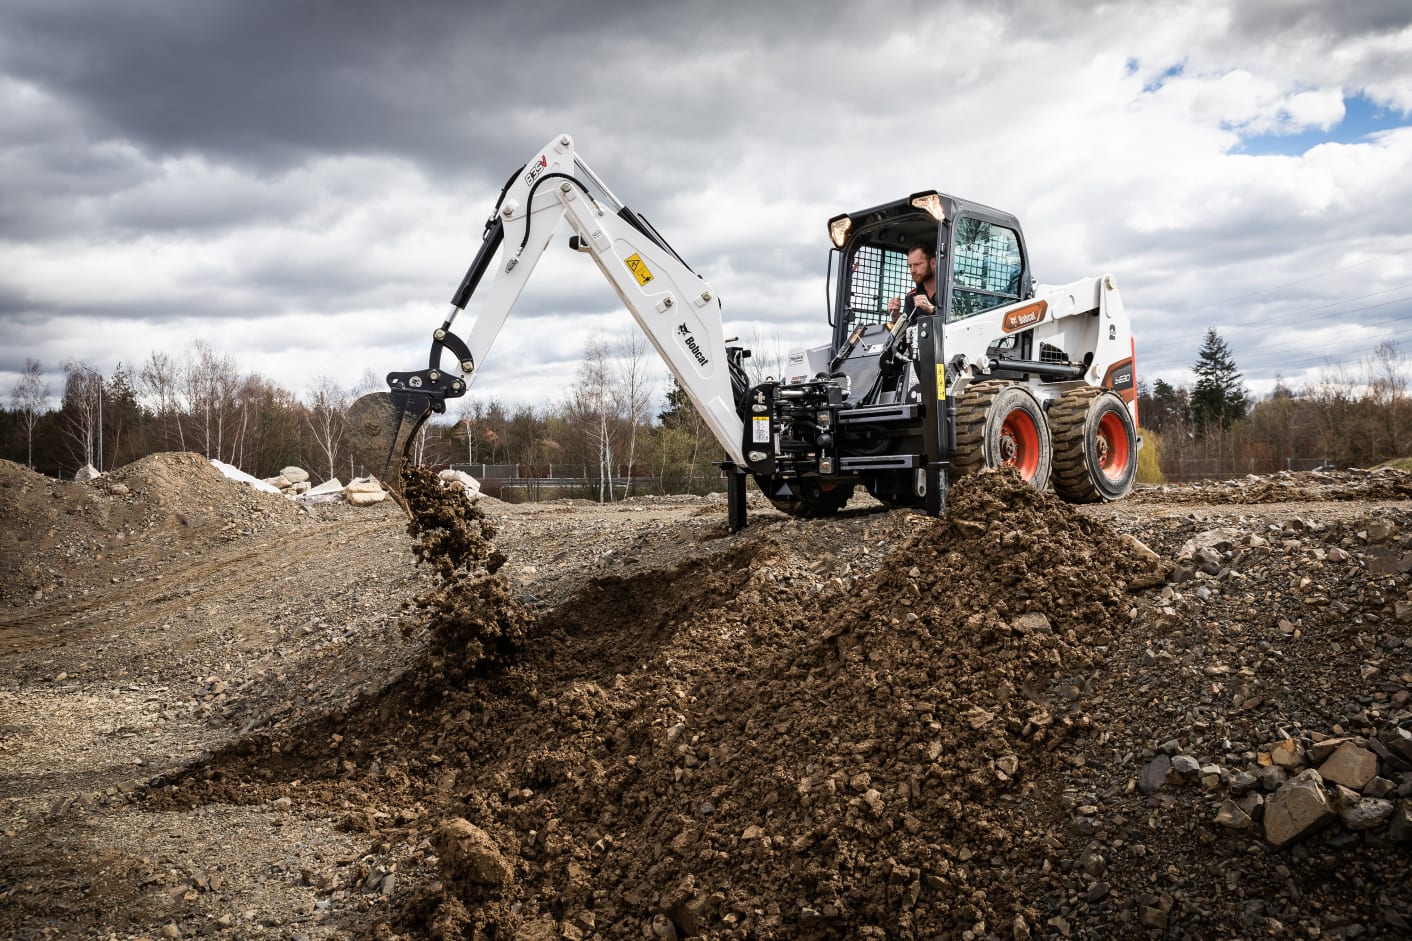 Browse Specs and more for the S630 Skid-Steer Loader - White Star Machinery